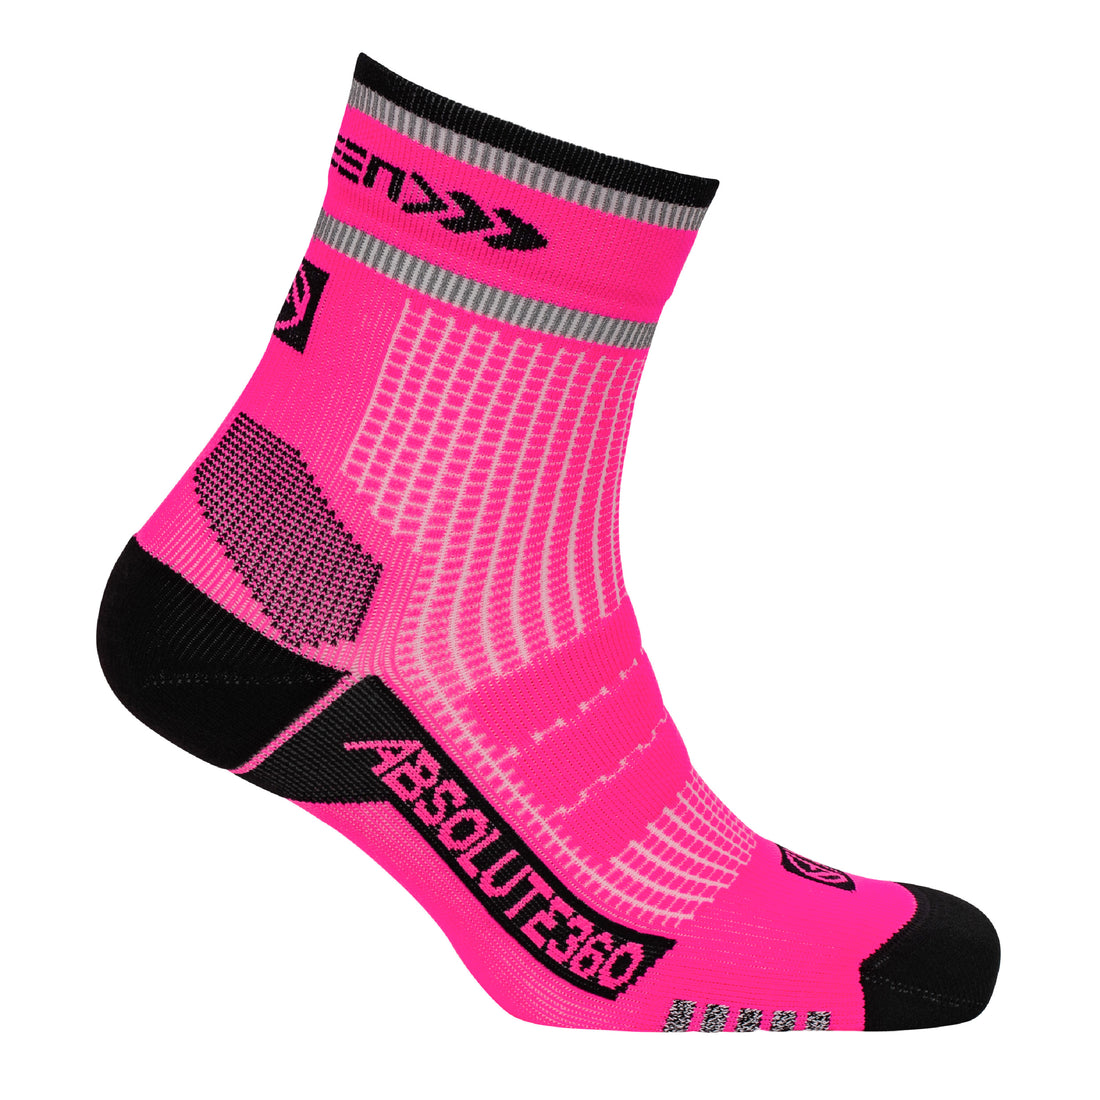 Absolute 360 [Be Seen] Performance Reflective Running Socks